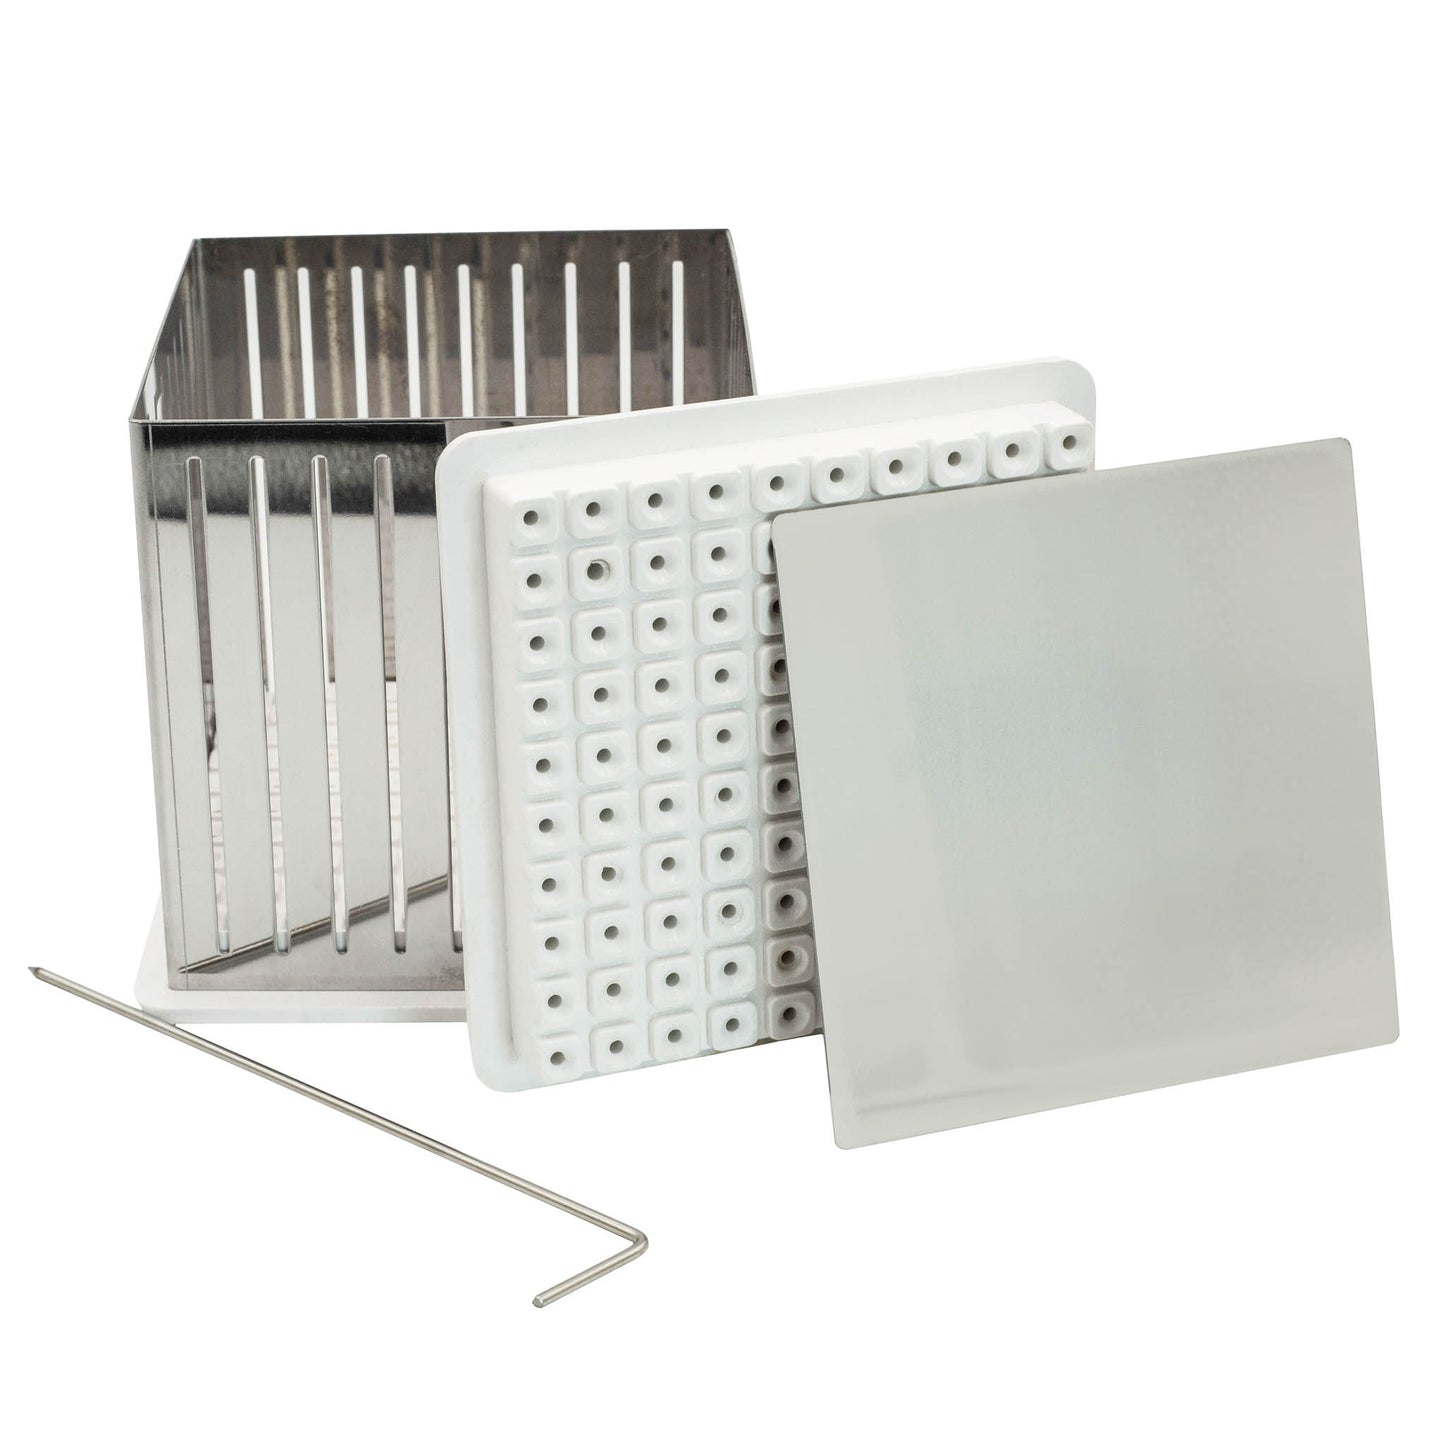 Stainless steel skewer cube comes with two lids made from a ceramic and polystyrene composite. 